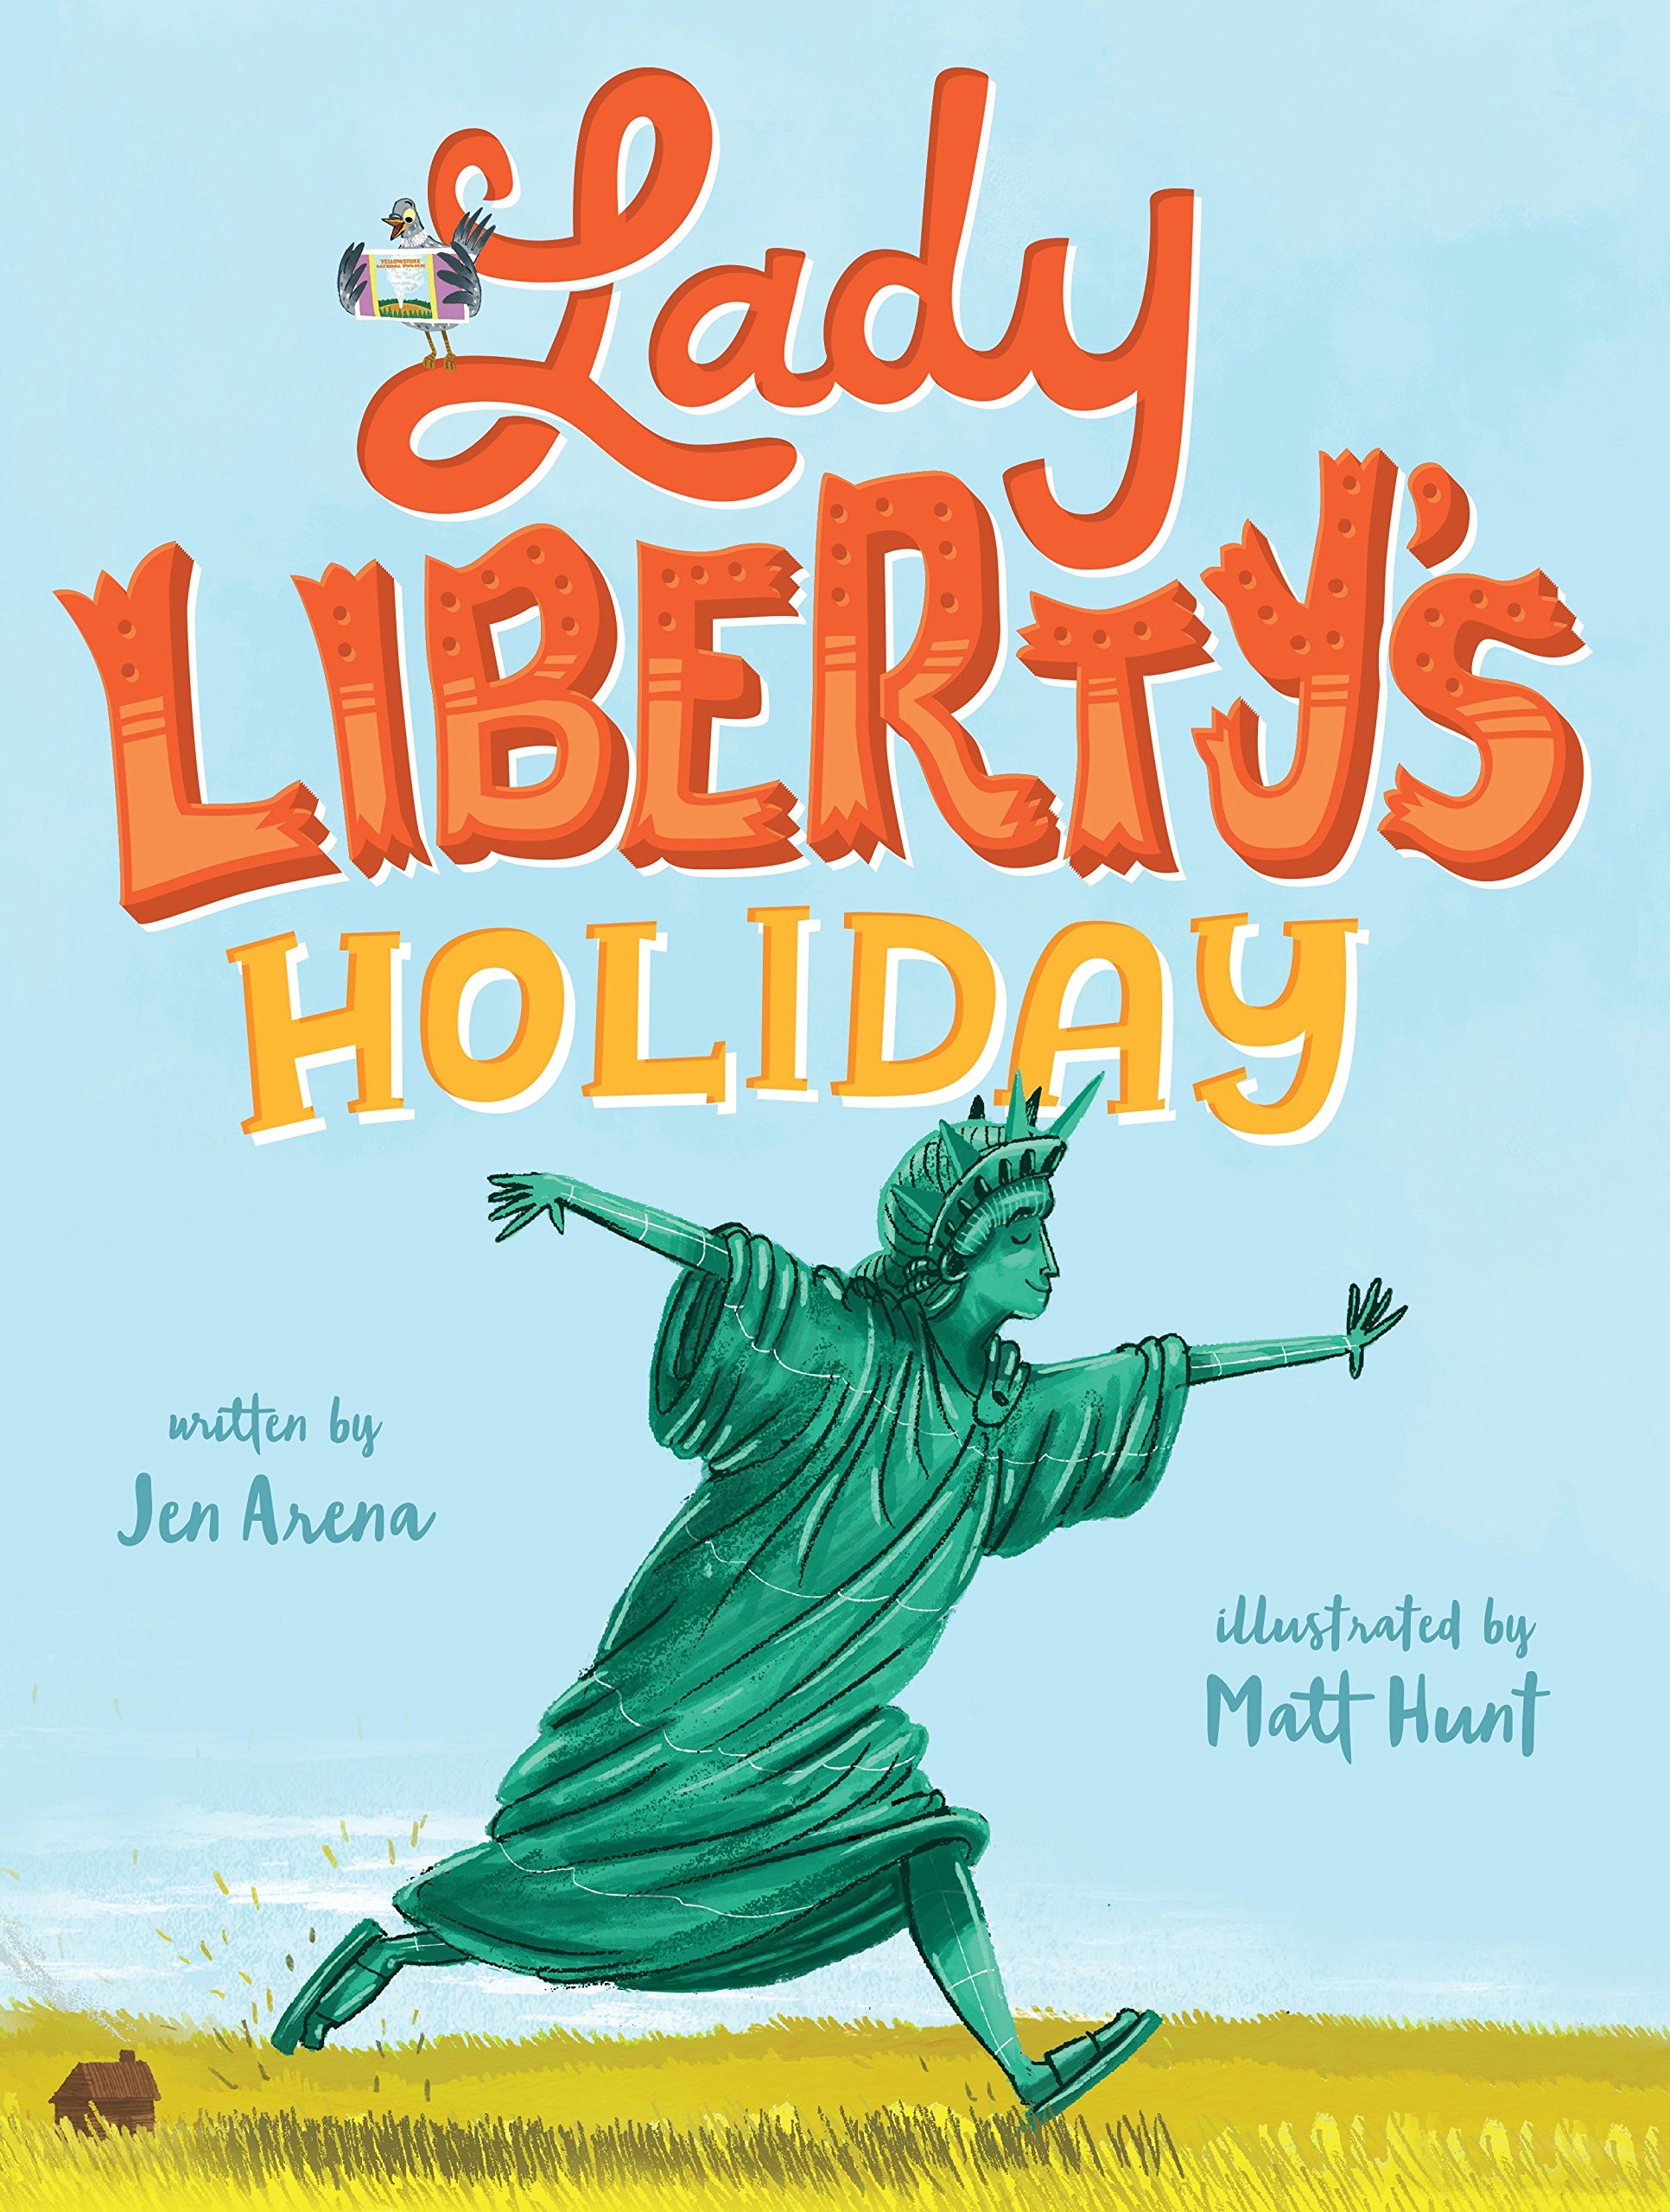 speech and language teaching concepts for Lady Liberty's Holiday in speech therapy